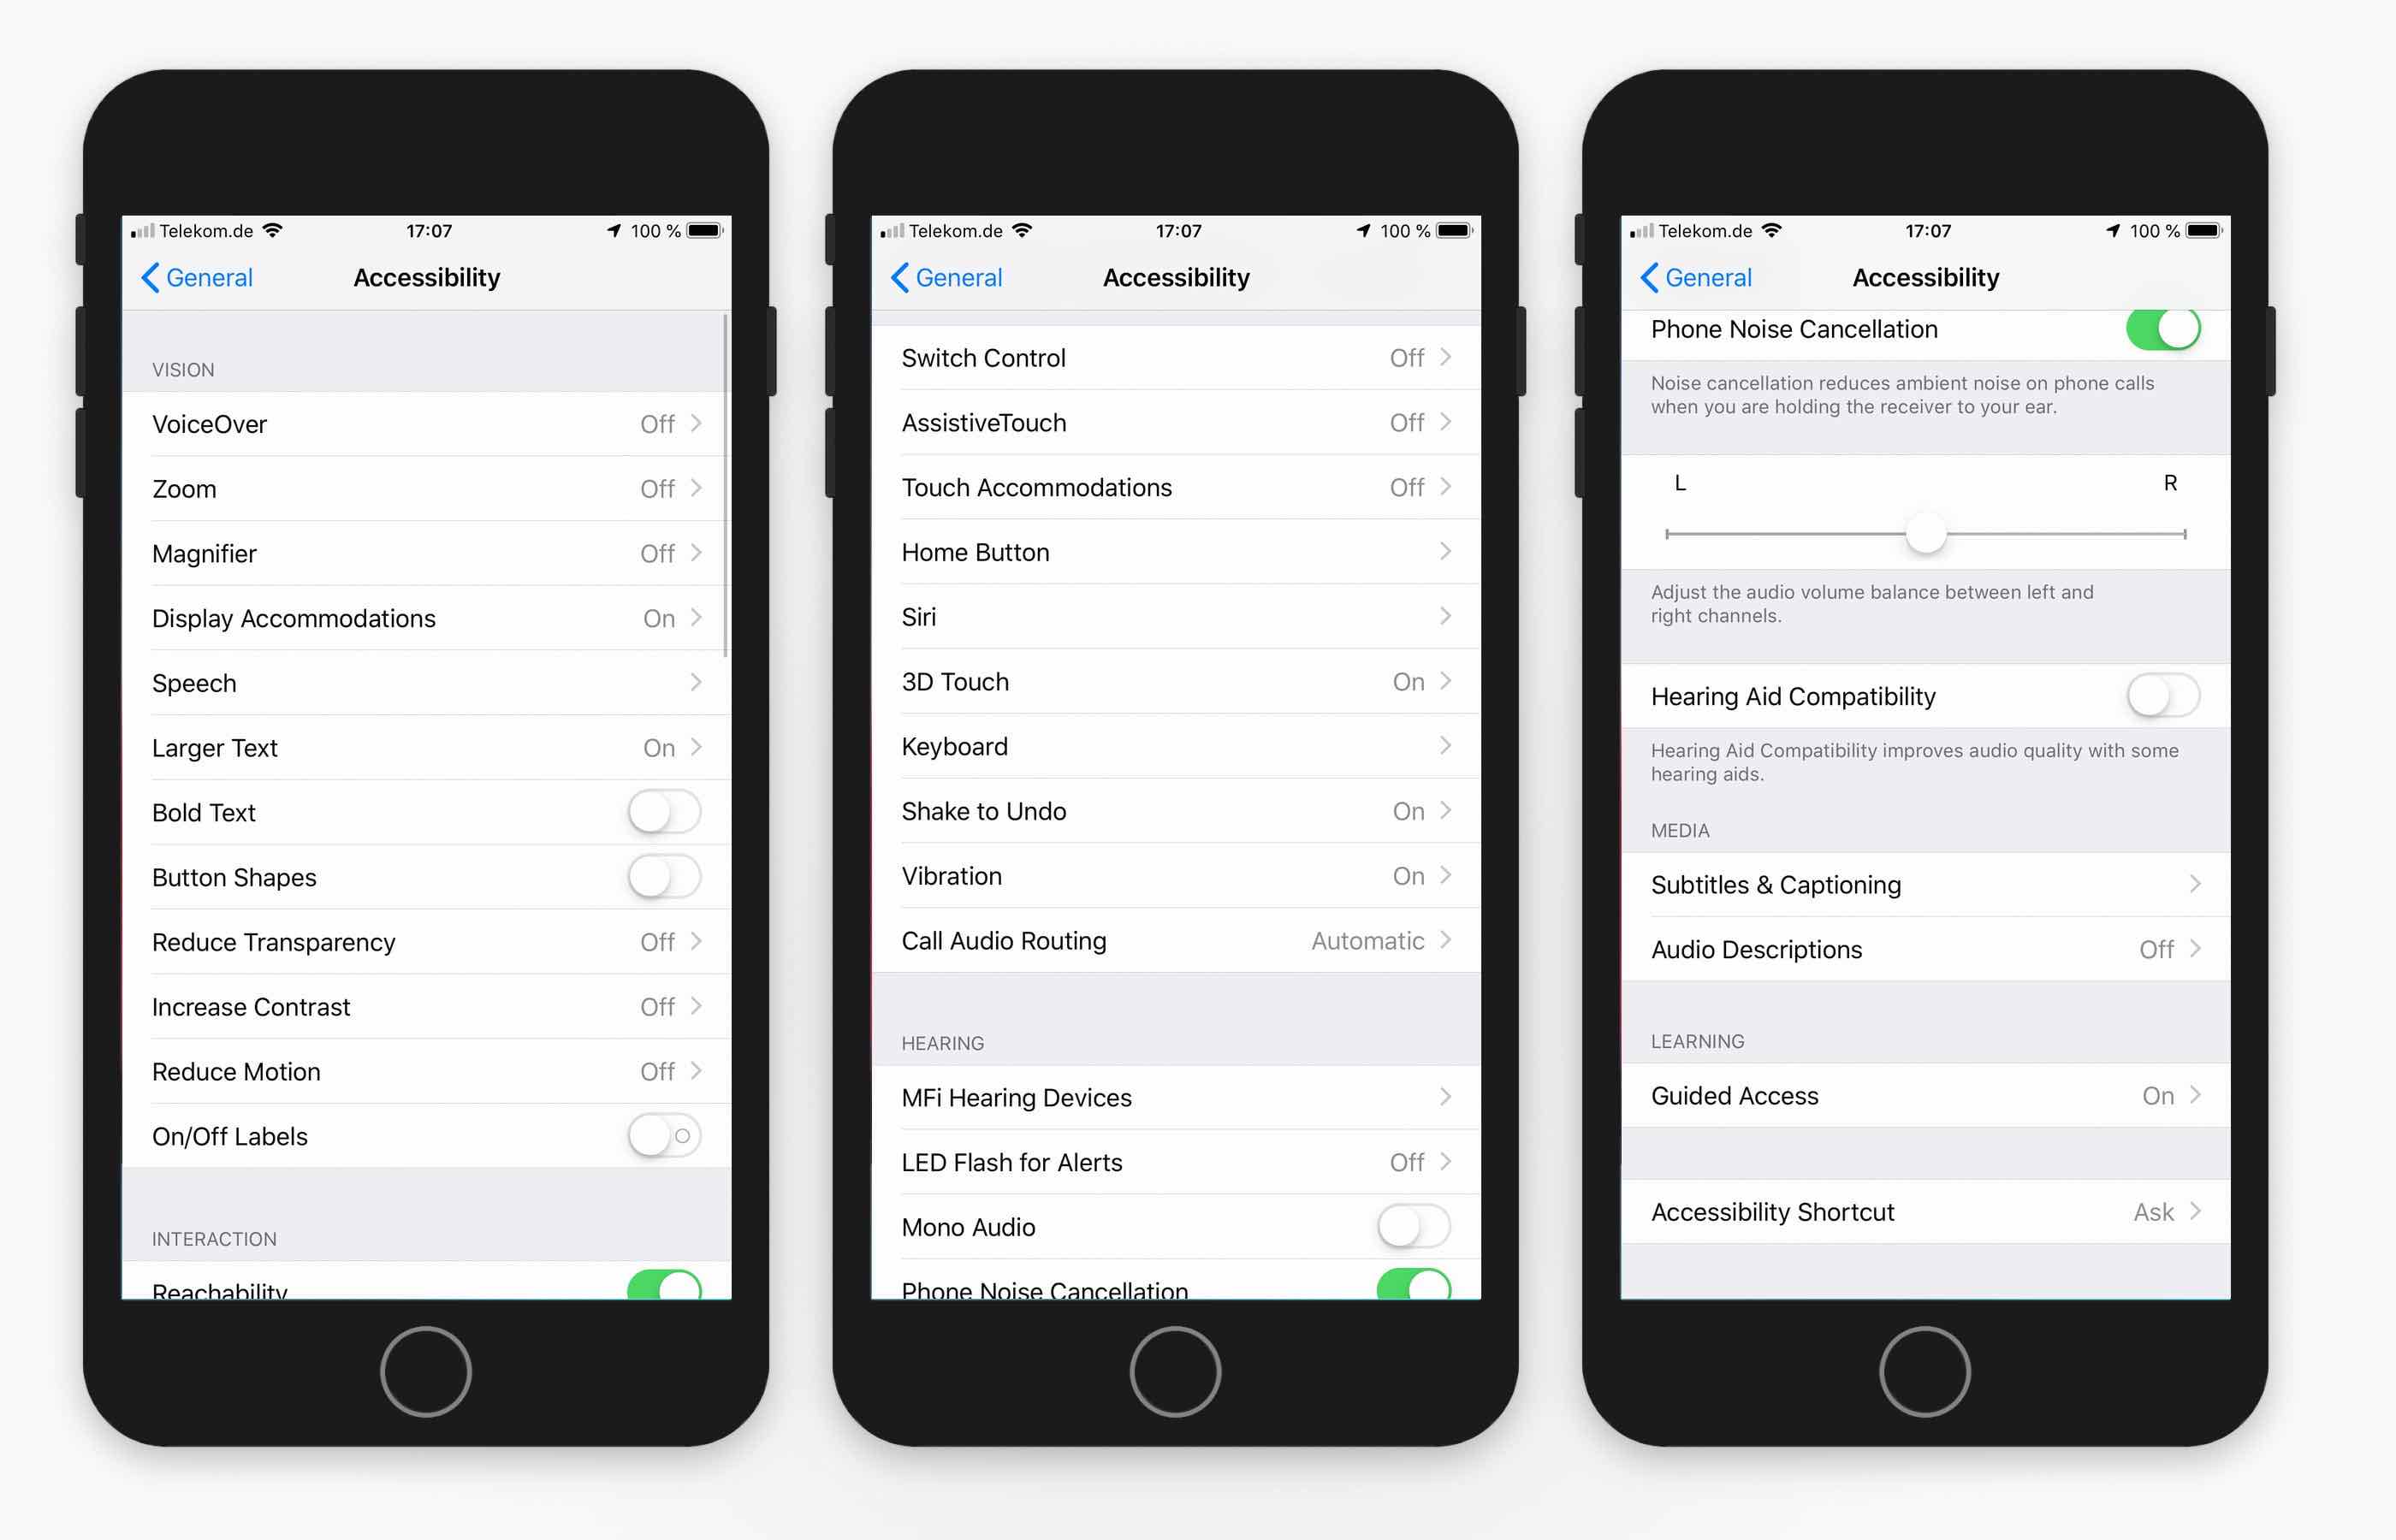 The list of accessibility settings in iOS 12